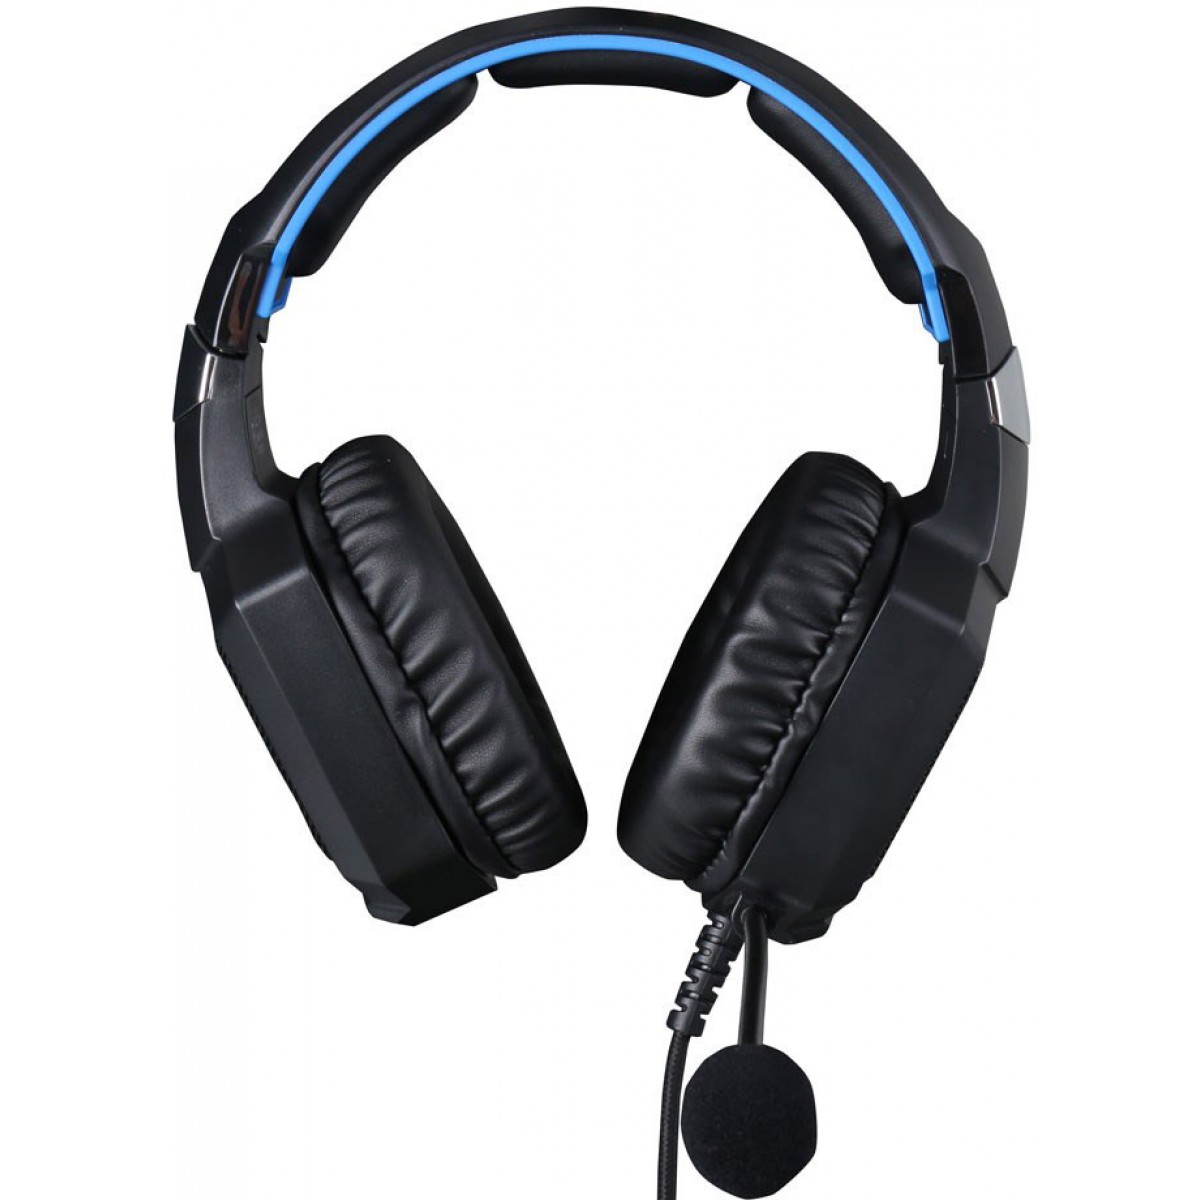 Headset Gamer HP H320GS, Surround 7.1, Led Blue